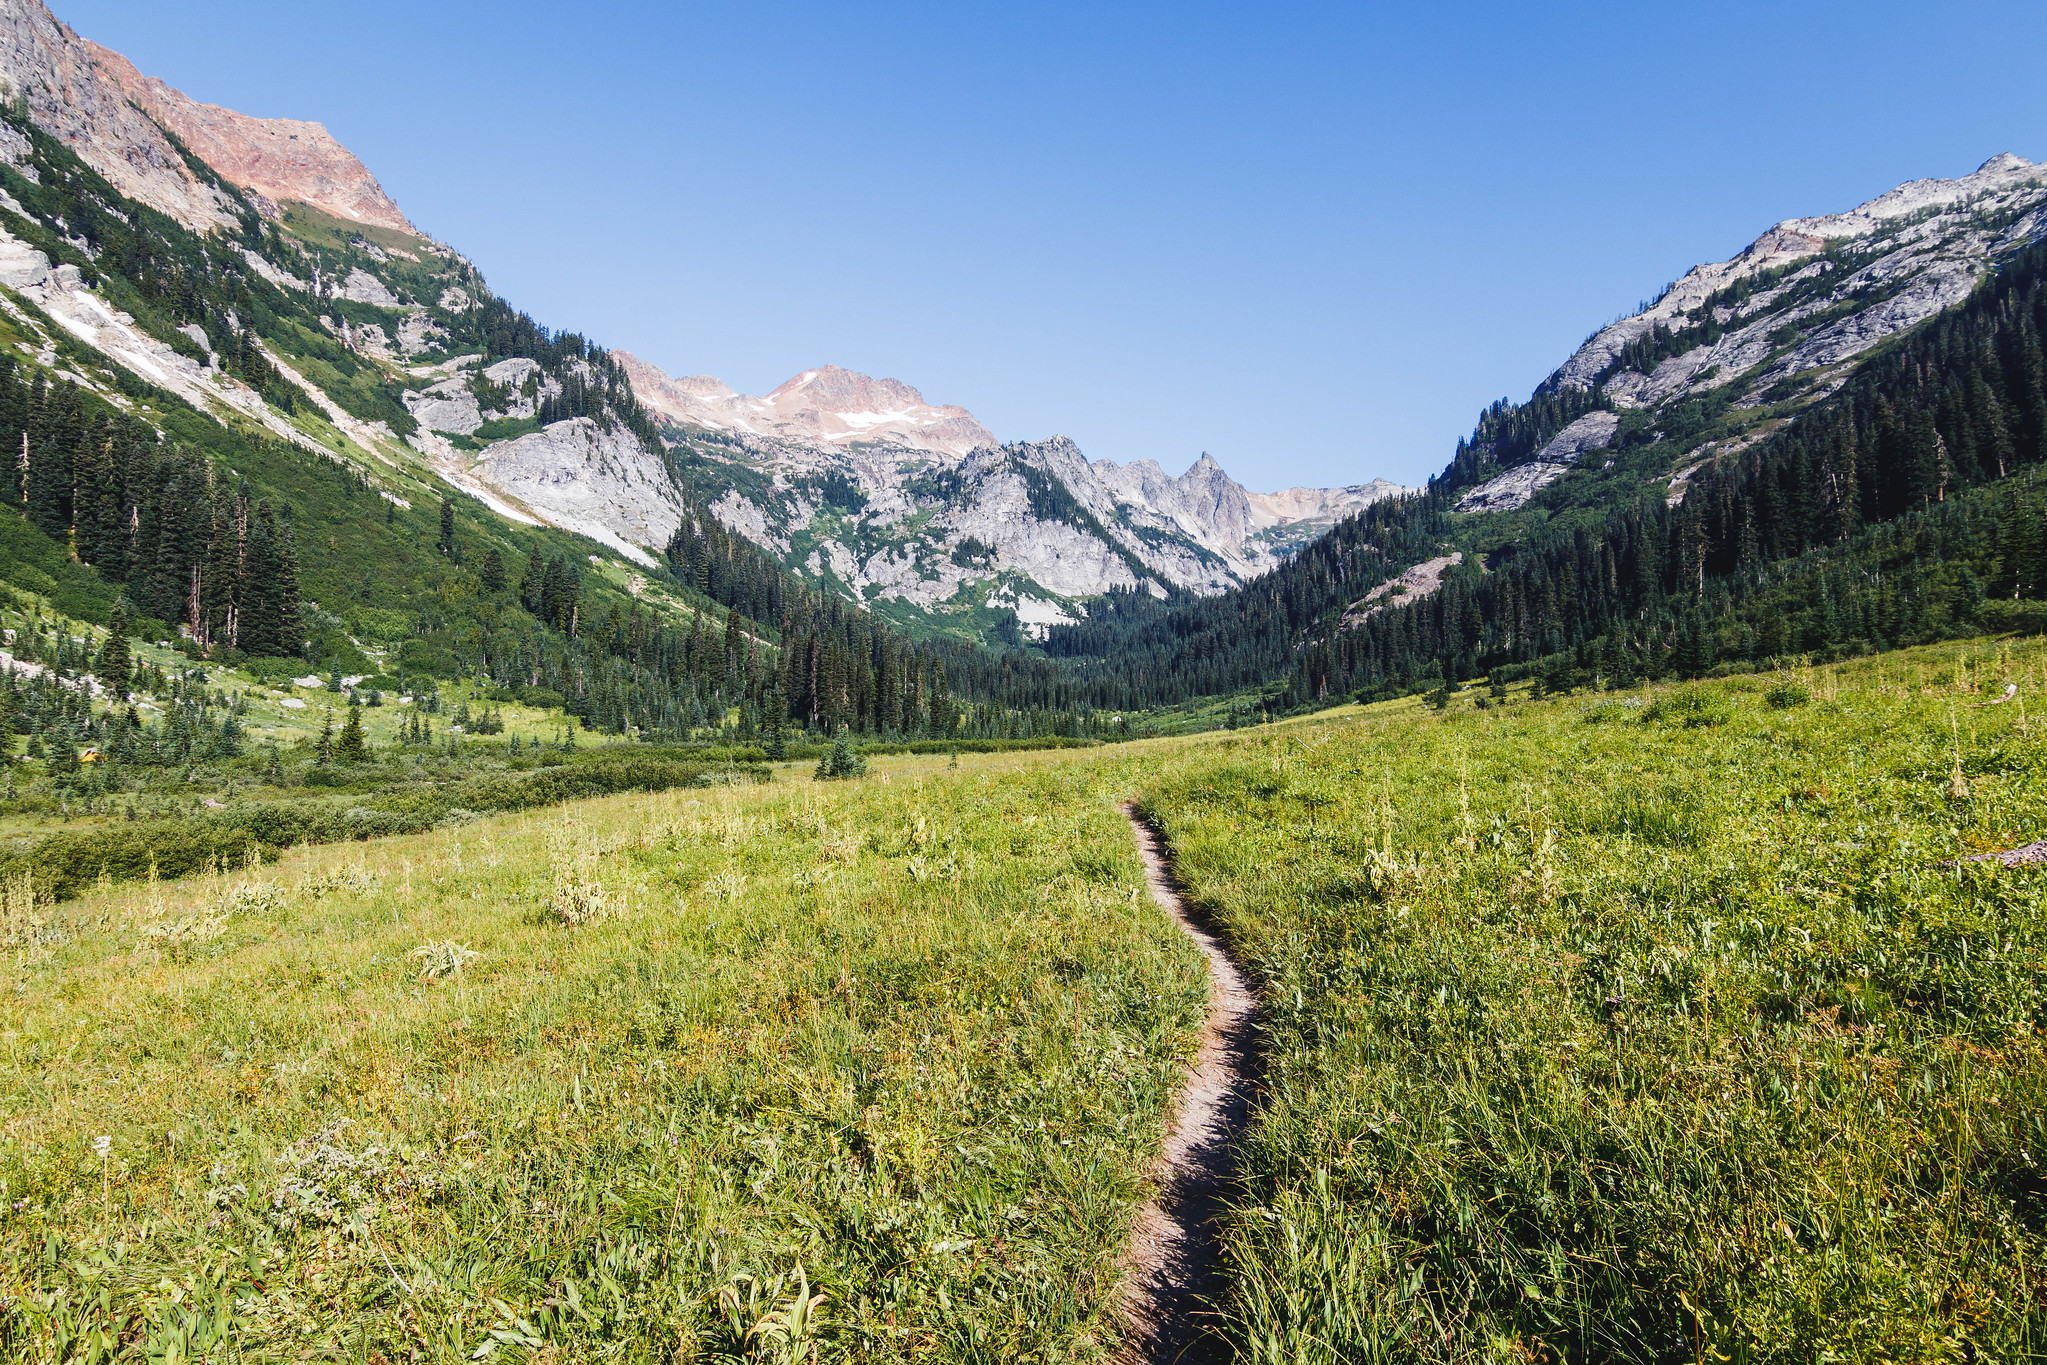 Spider Meadow to North Star Mountain